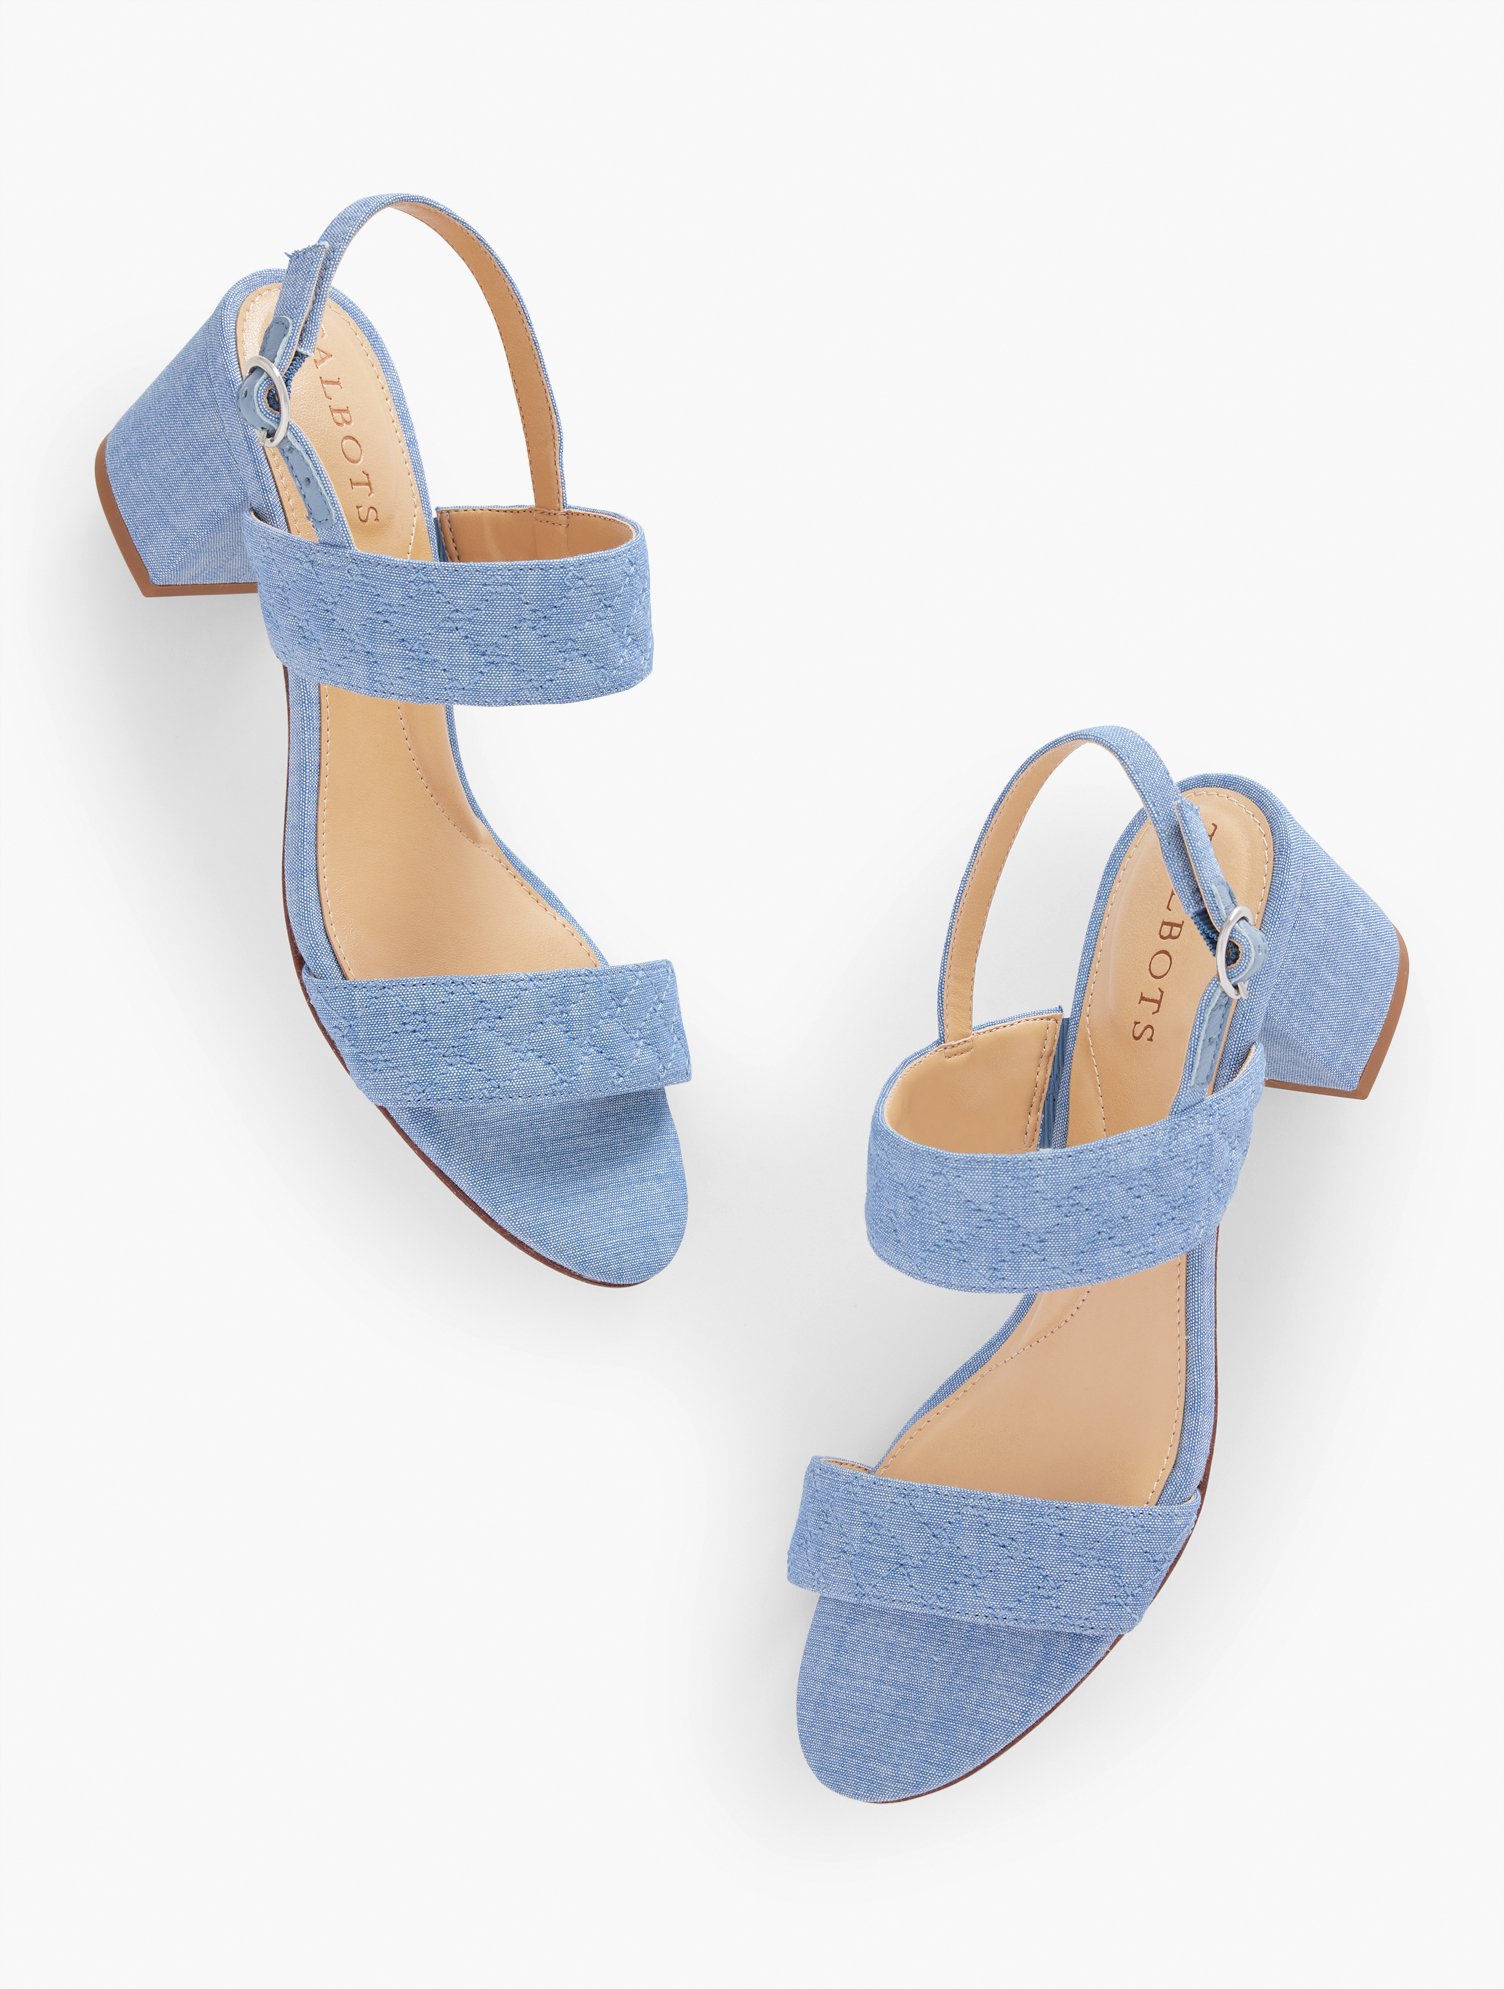 Talbots Mimi Quilted Sandals - Chambray - Light Blue - 10m - 100% Cotton